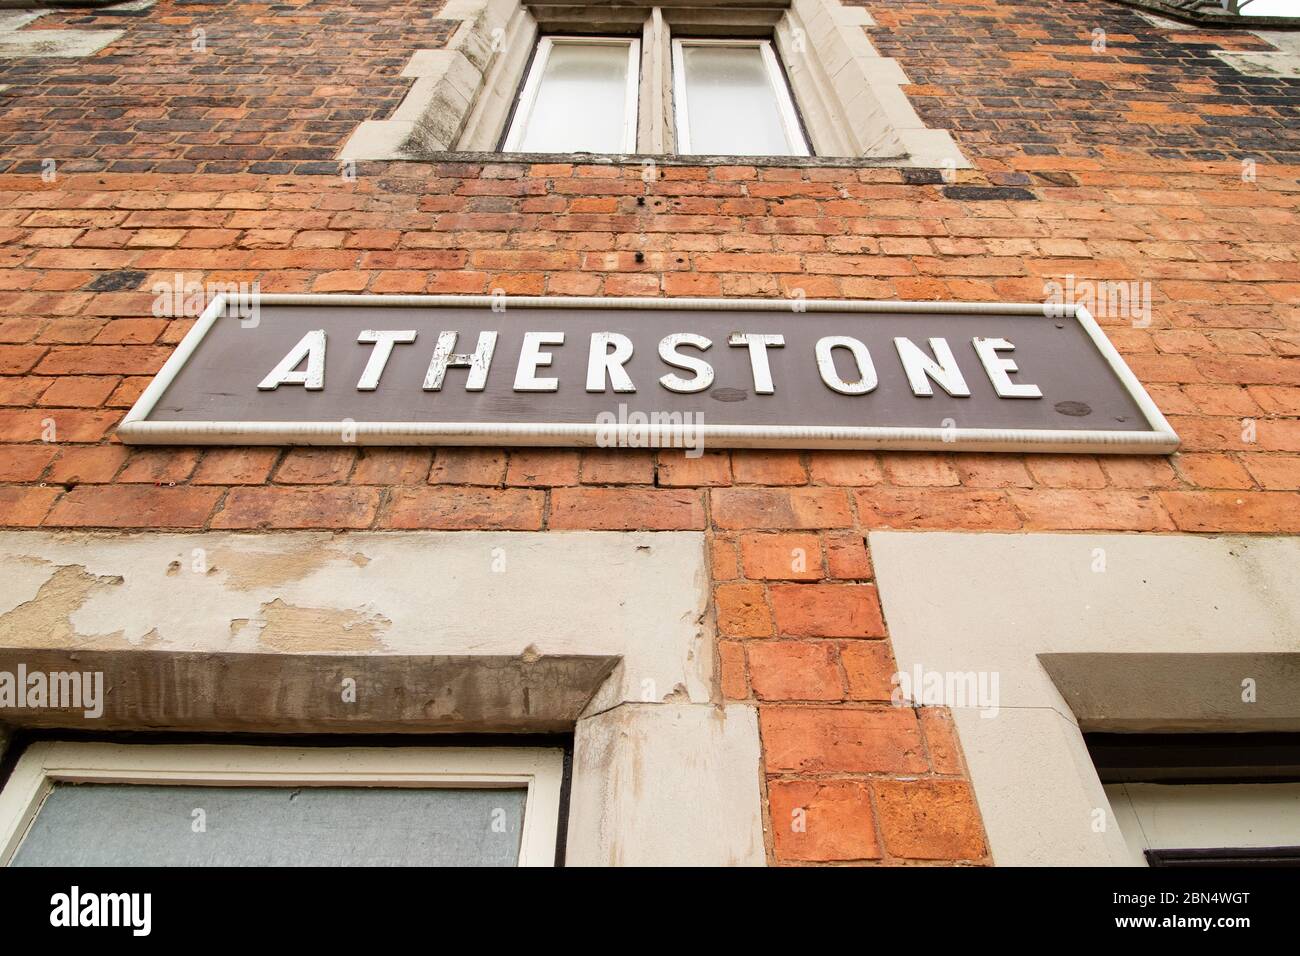 The old original train signs on the side of the platform buildings on the London North Western train station, Atherstone, North Warwickshire. The station was once a main line station, it now has trains running to London, although high speed trains pass directly through the station. Stock Photo